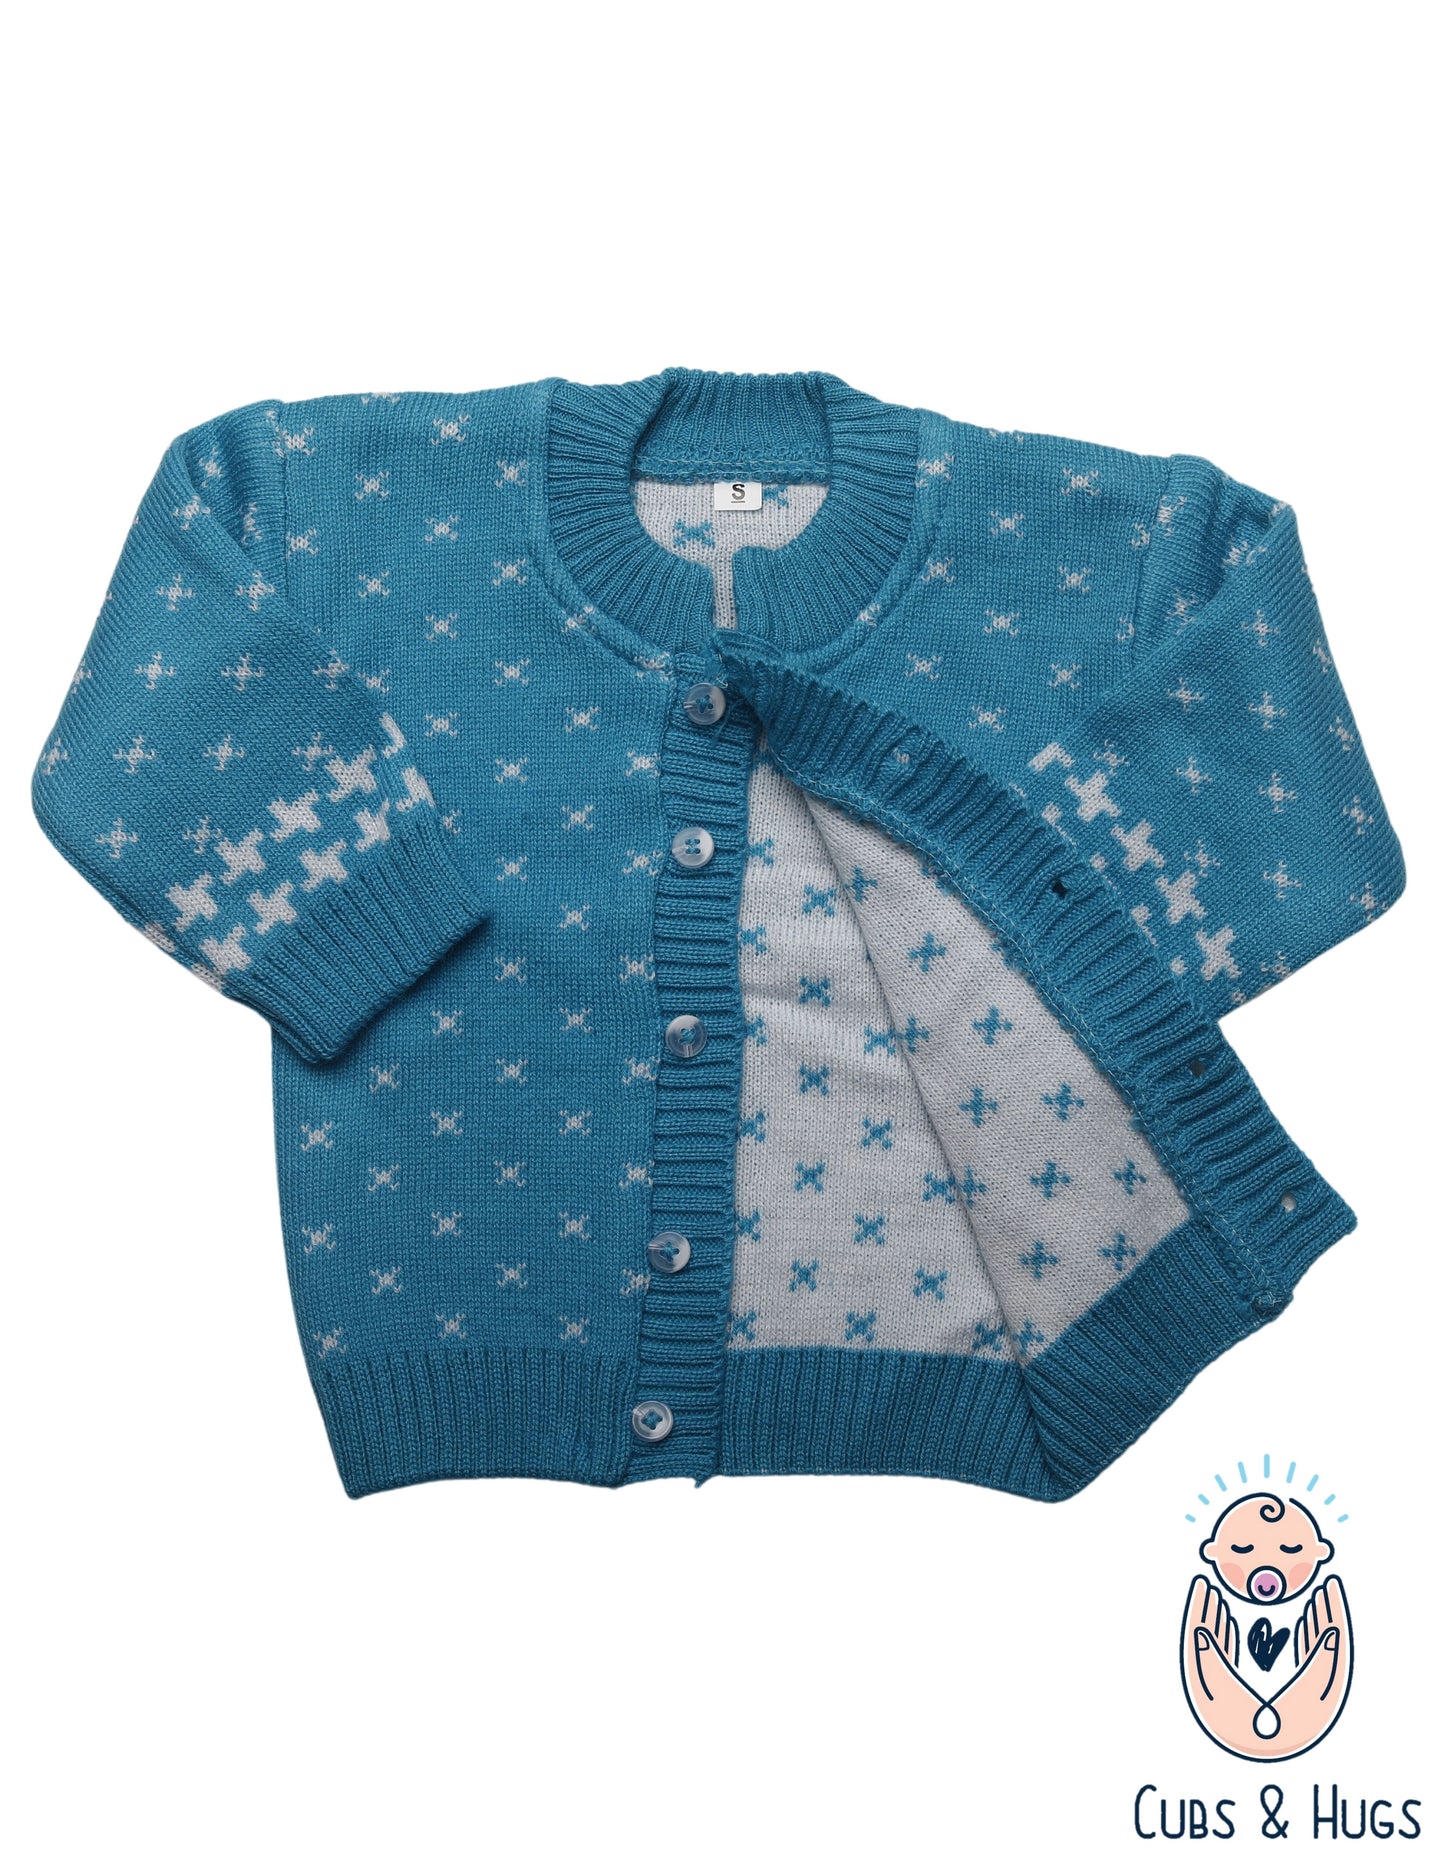 CUBS & HUGS Baby Girls Boys Woolen Round Neck Cardigan Sweater-Turquoise